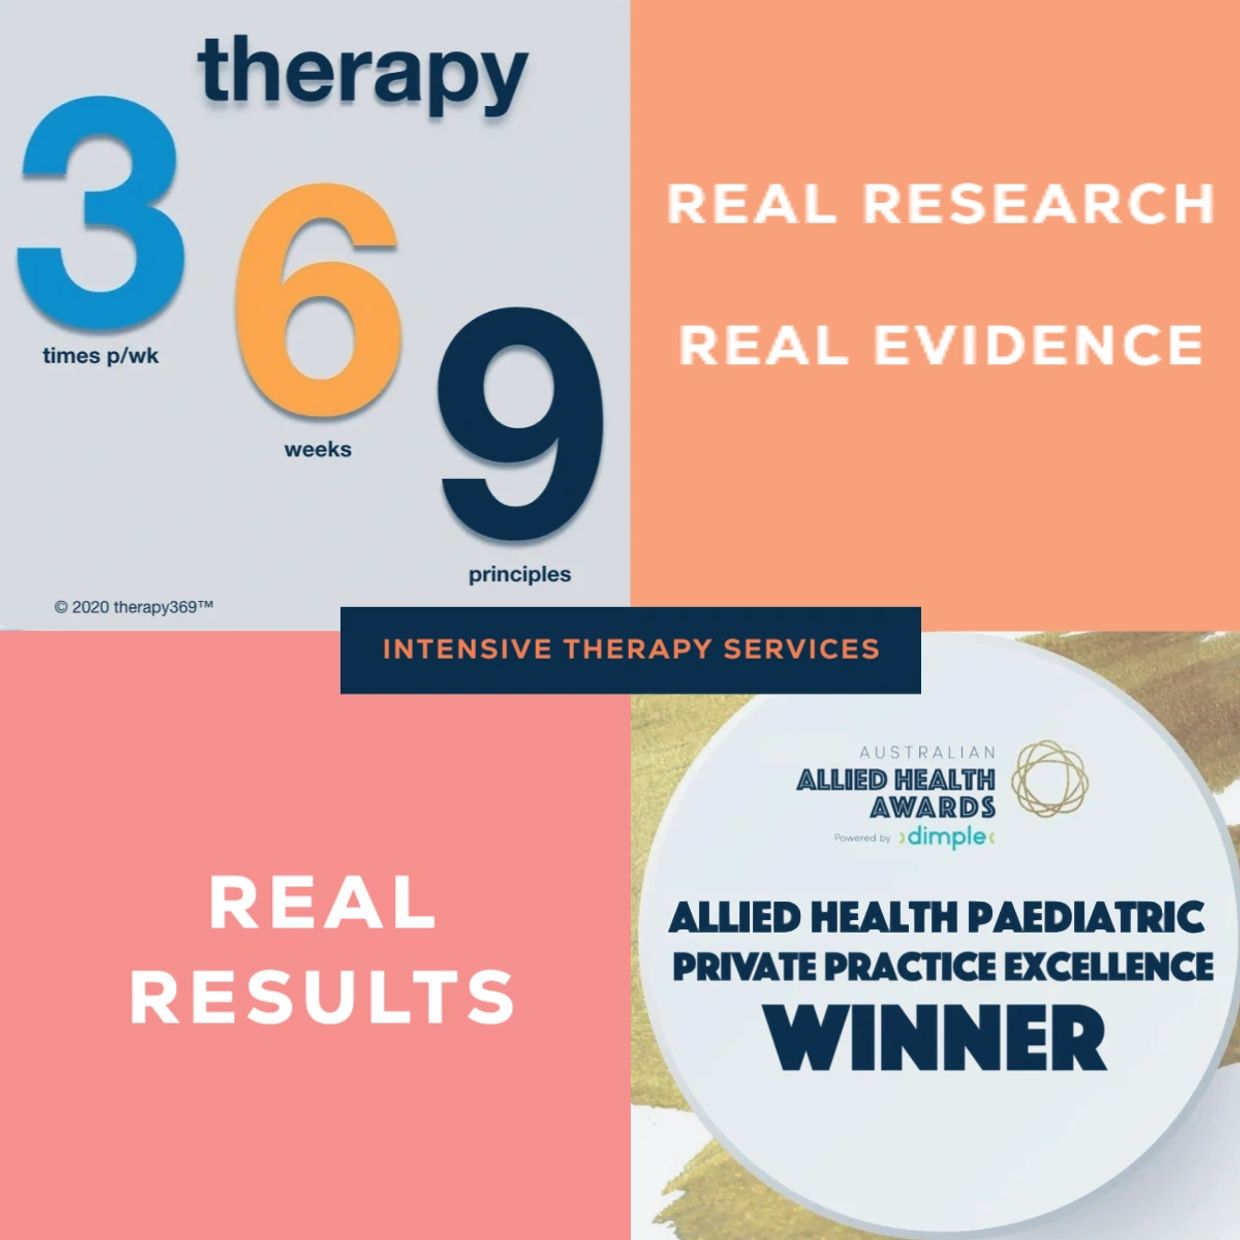 intensive therapy 369 - real research, real evidence, real results